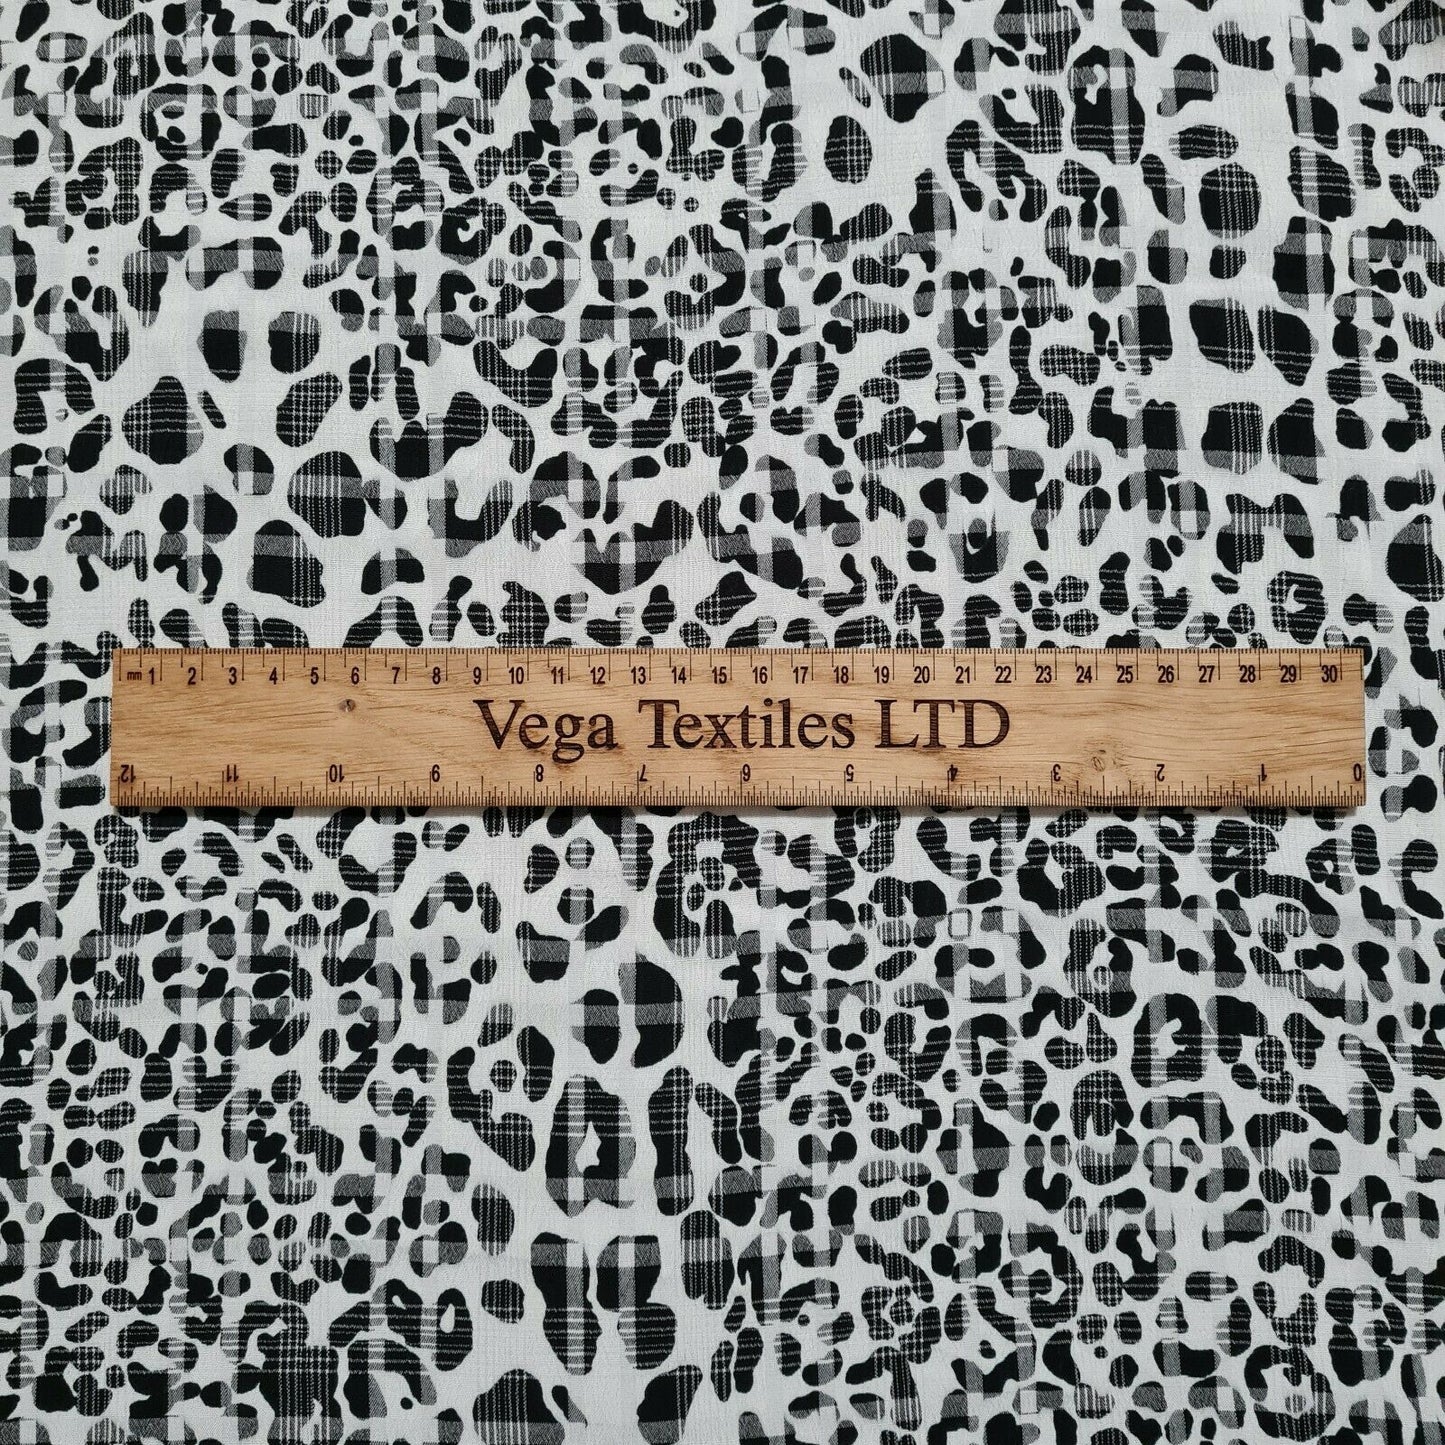 Viscose Polyester Fabric Black And White Cheetah Printed Checked 55" Wide